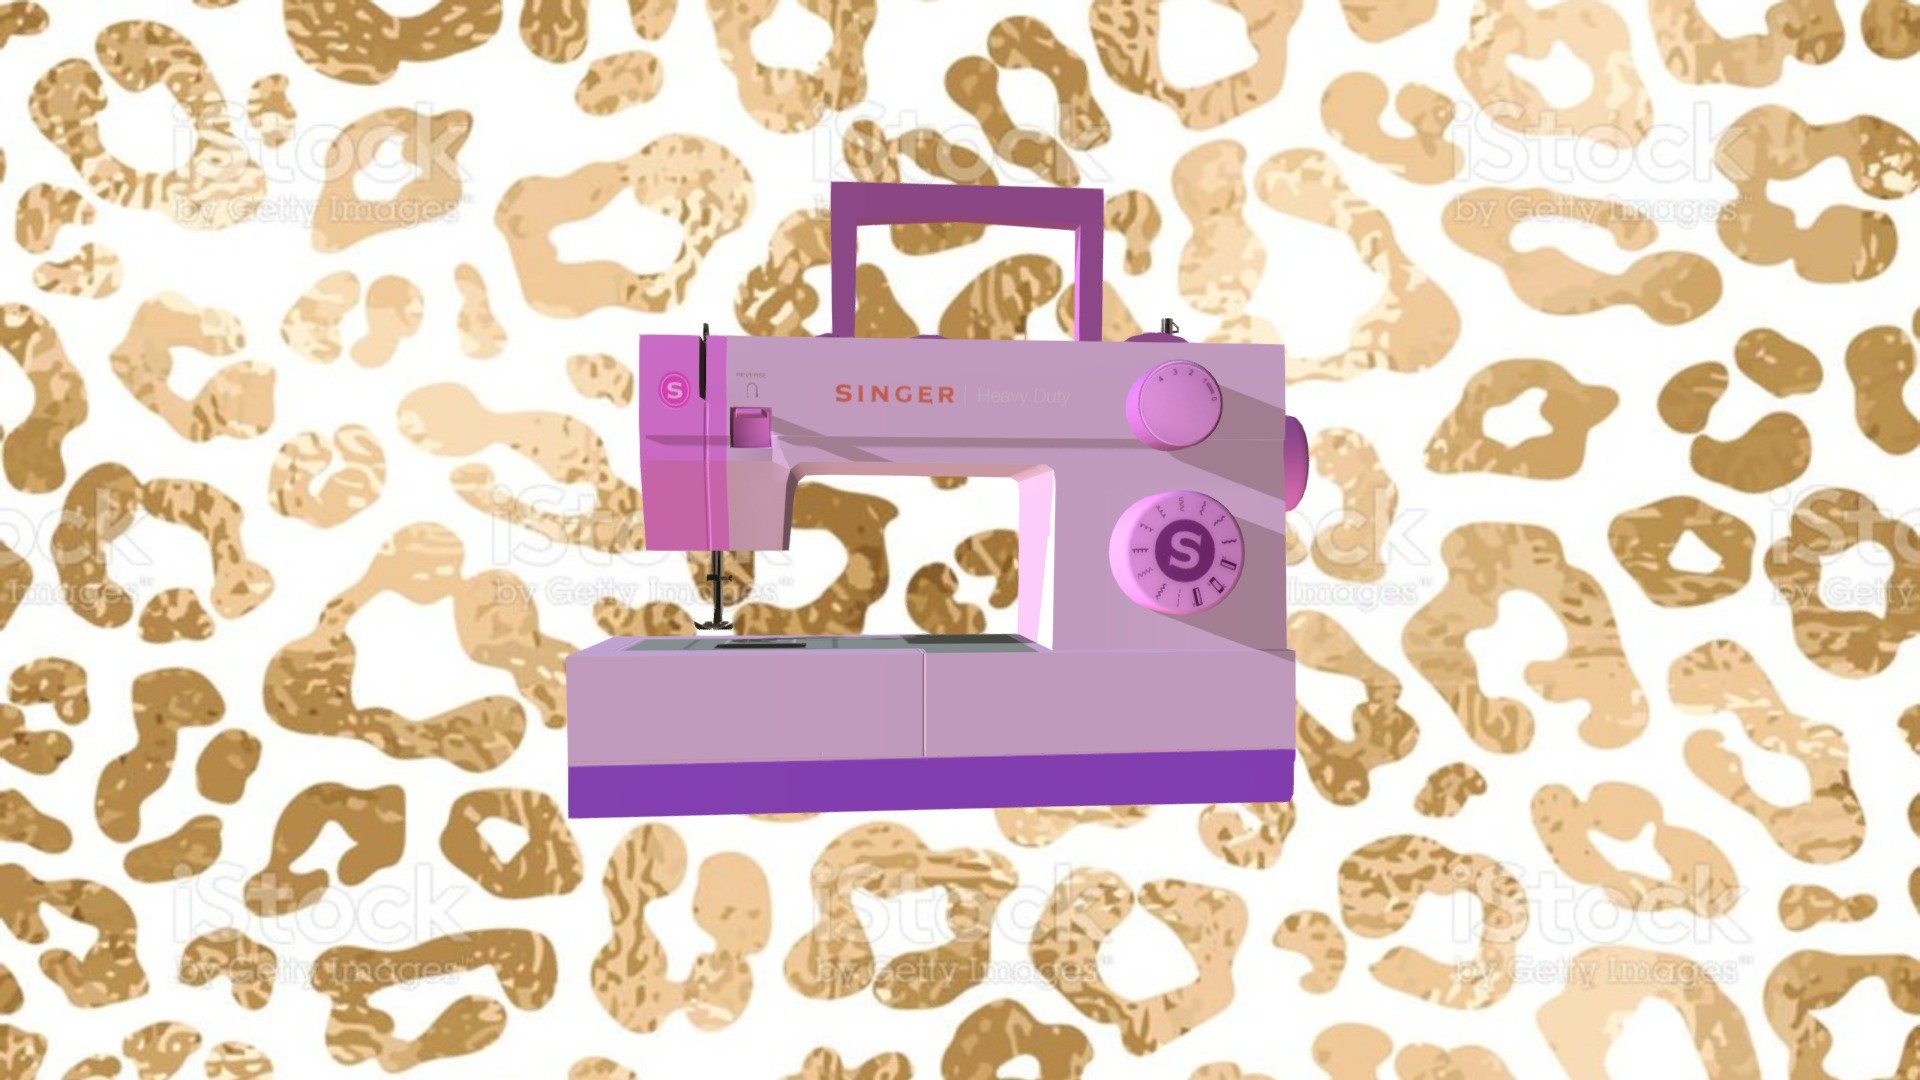 SINGER Heavy Duty Sewing Machine in pink and purple.  Modeled by Kimmy Justice for Platt College Intro to 3D course 3d model